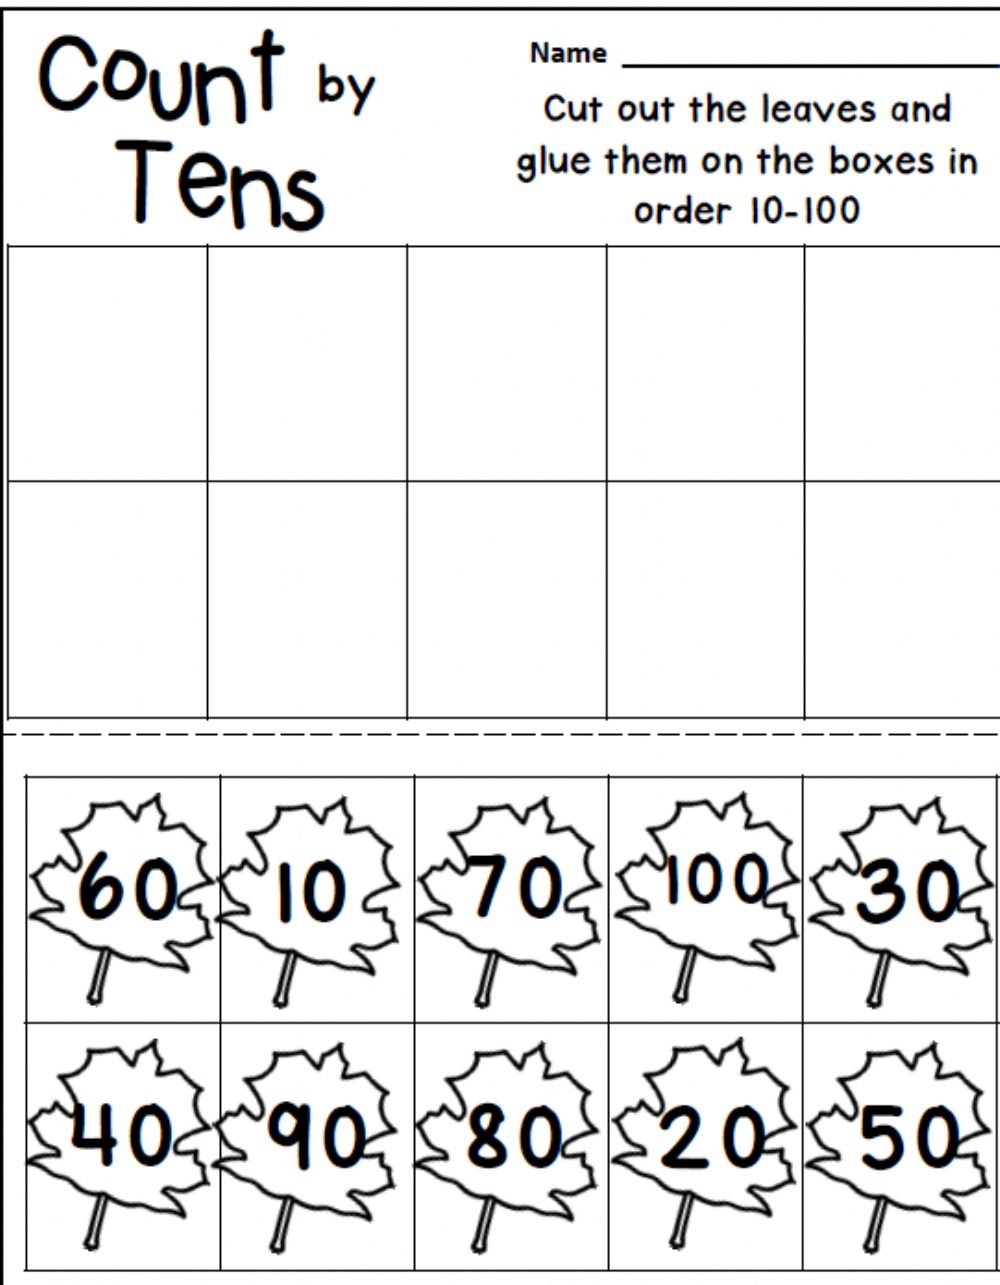 Printable Counting By 10s Chart_59931